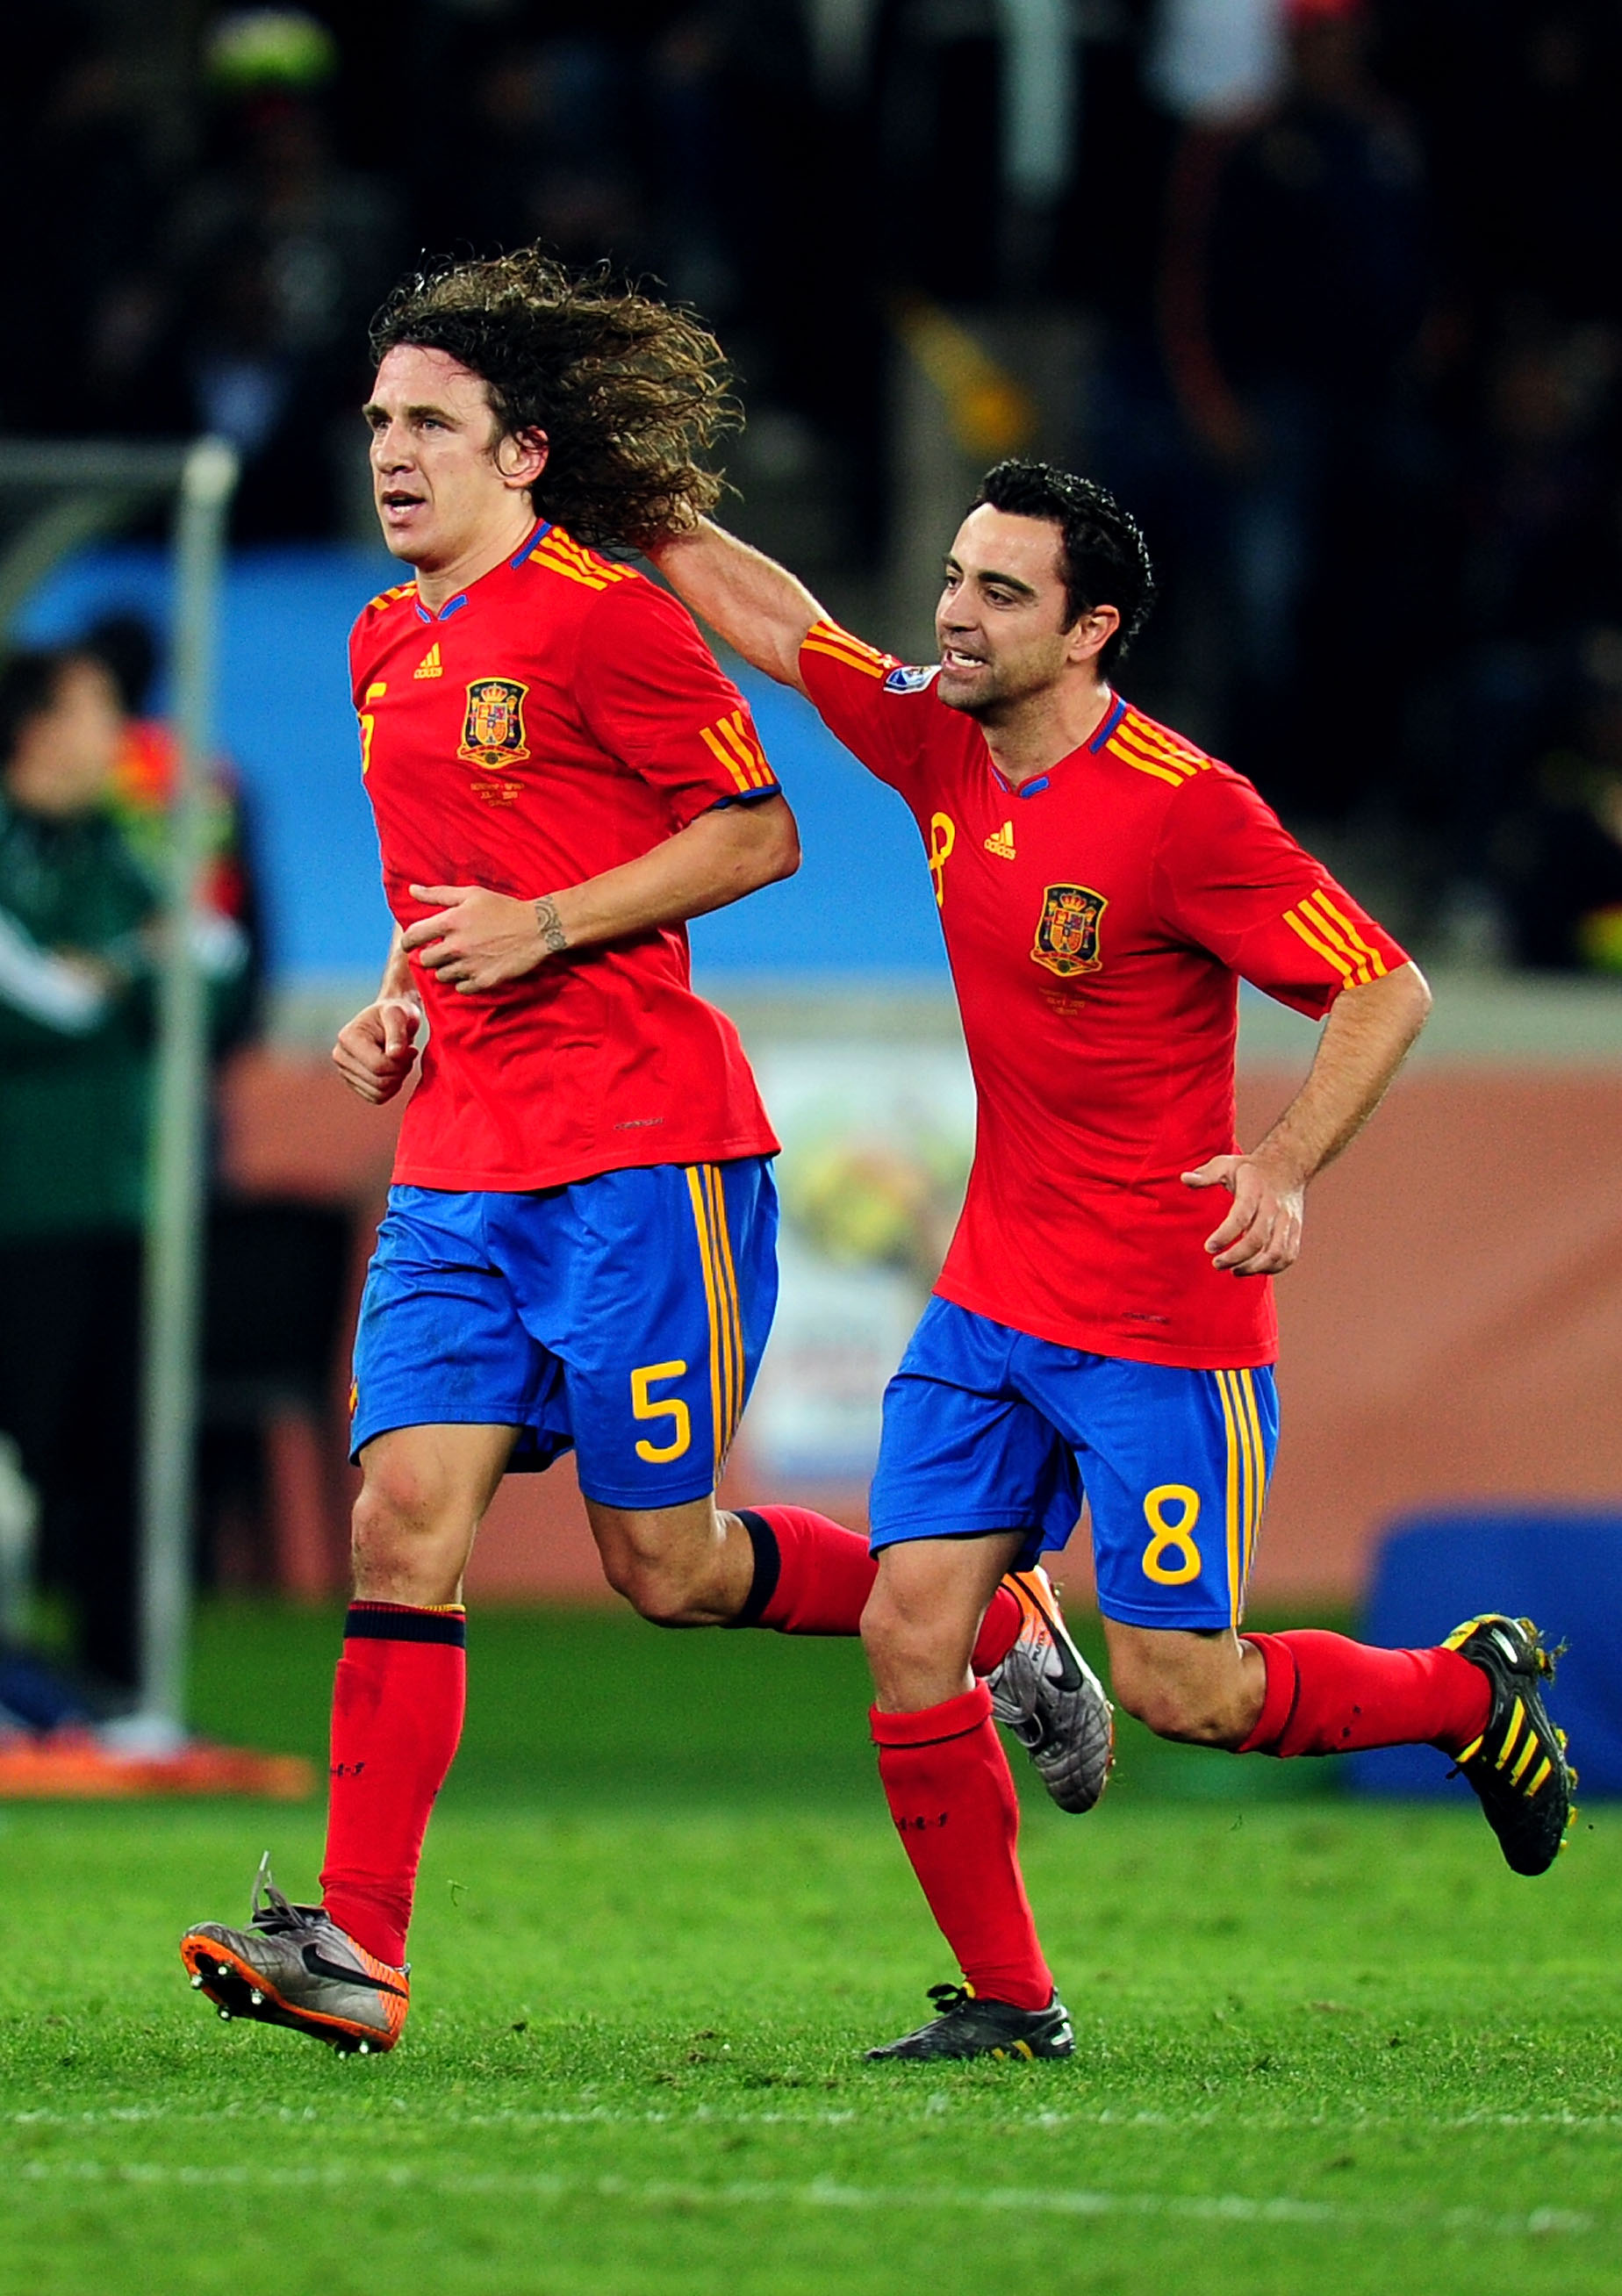 DURBAN, SOUTH AFRICA - JULY 07:  Carles Puyol of Spain celebrates scoring his side's first goal with team mate Xavi Hernandez (R) during the 2010 FIFA World Cup South Africa Semi Final match between Germany and Spain at Durban Stadium on July 7, 2010 in D